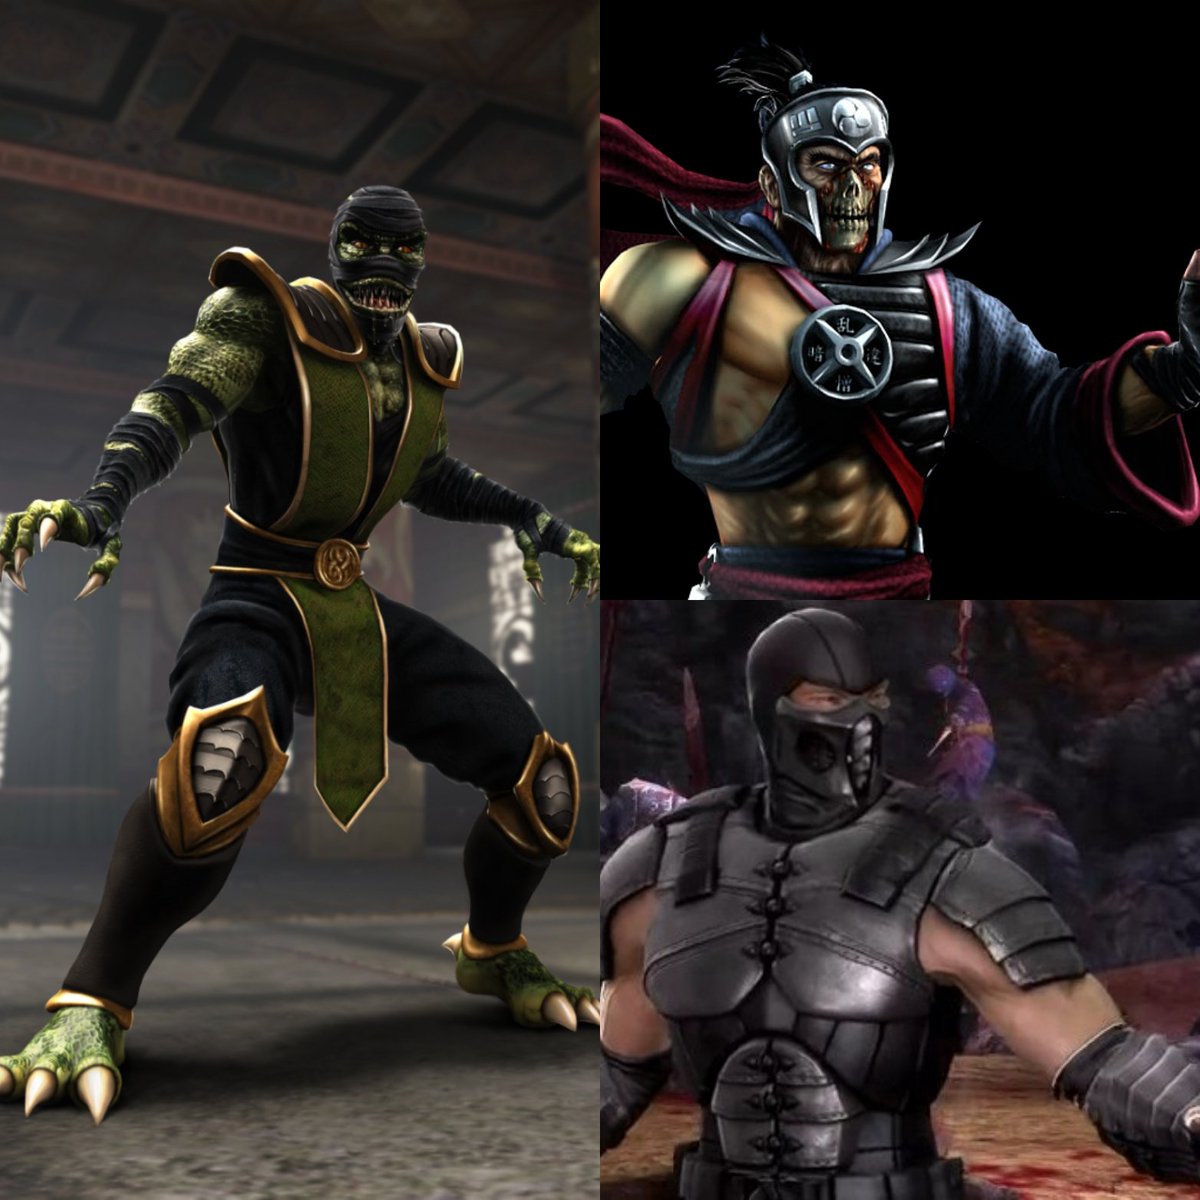 The 3 characters im dying to see in Mortal Kombat 1. #MortalKombat1